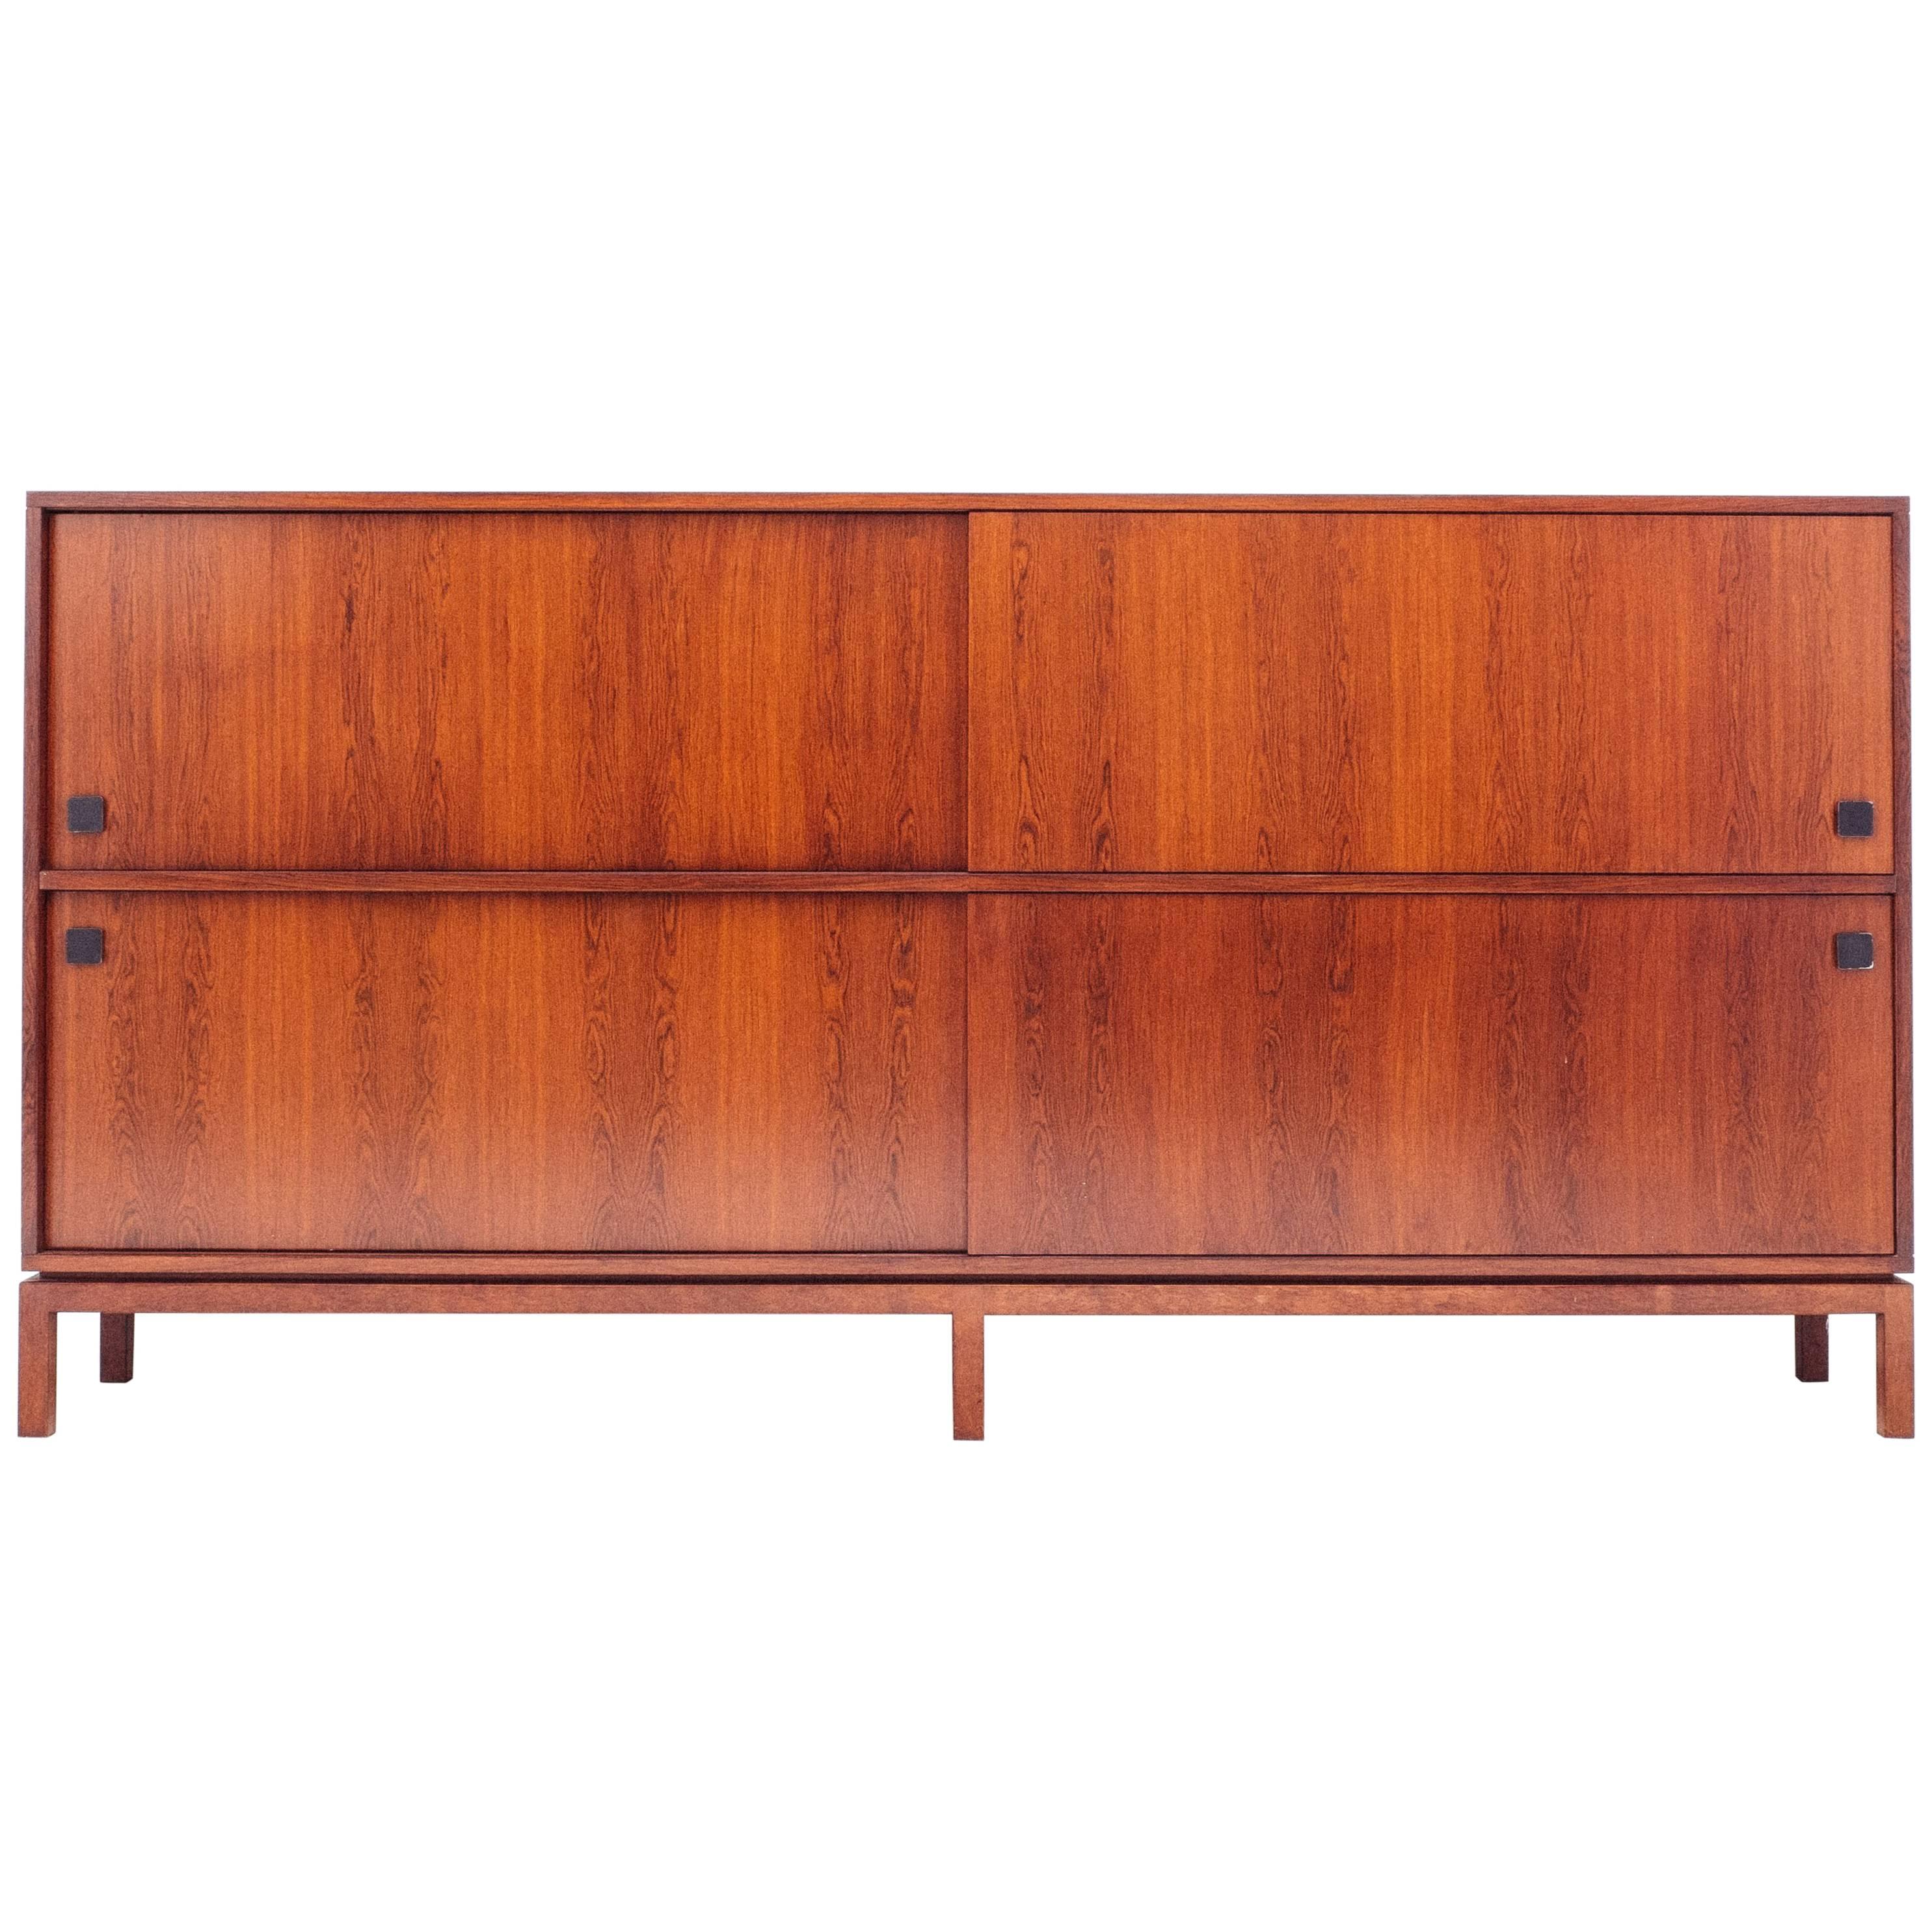 1964 Modernist Rosewood Extra Large High Cabinet by Alfred Hendrickx for Belform For Sale